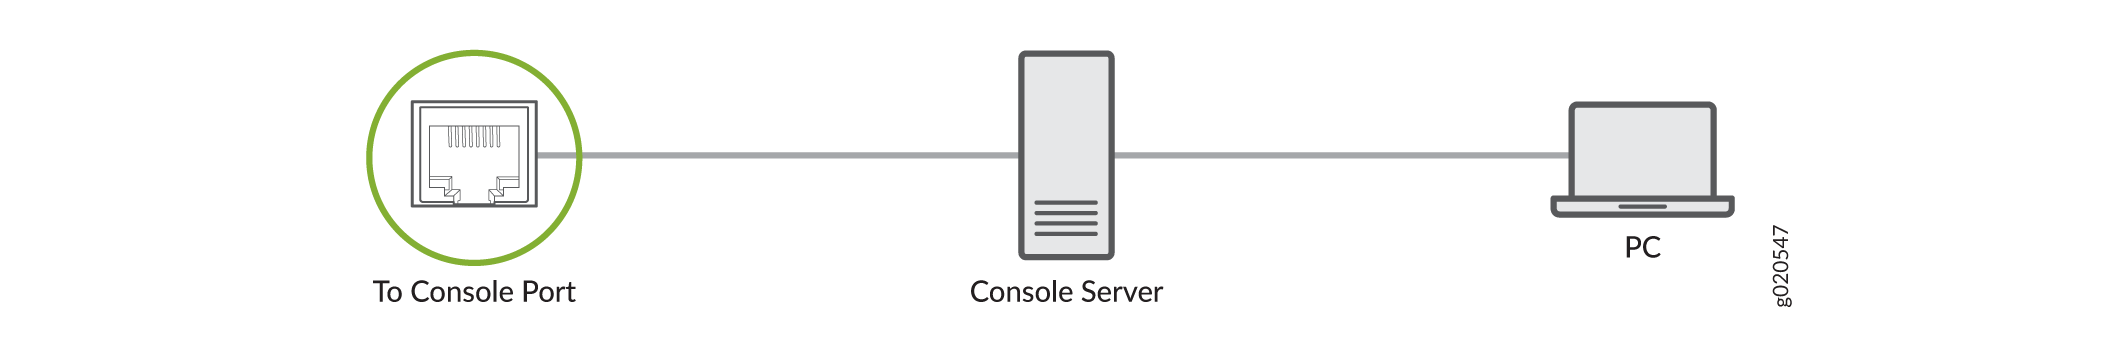 Connect the ACX7348 Router to a Management Console Through a Console Server